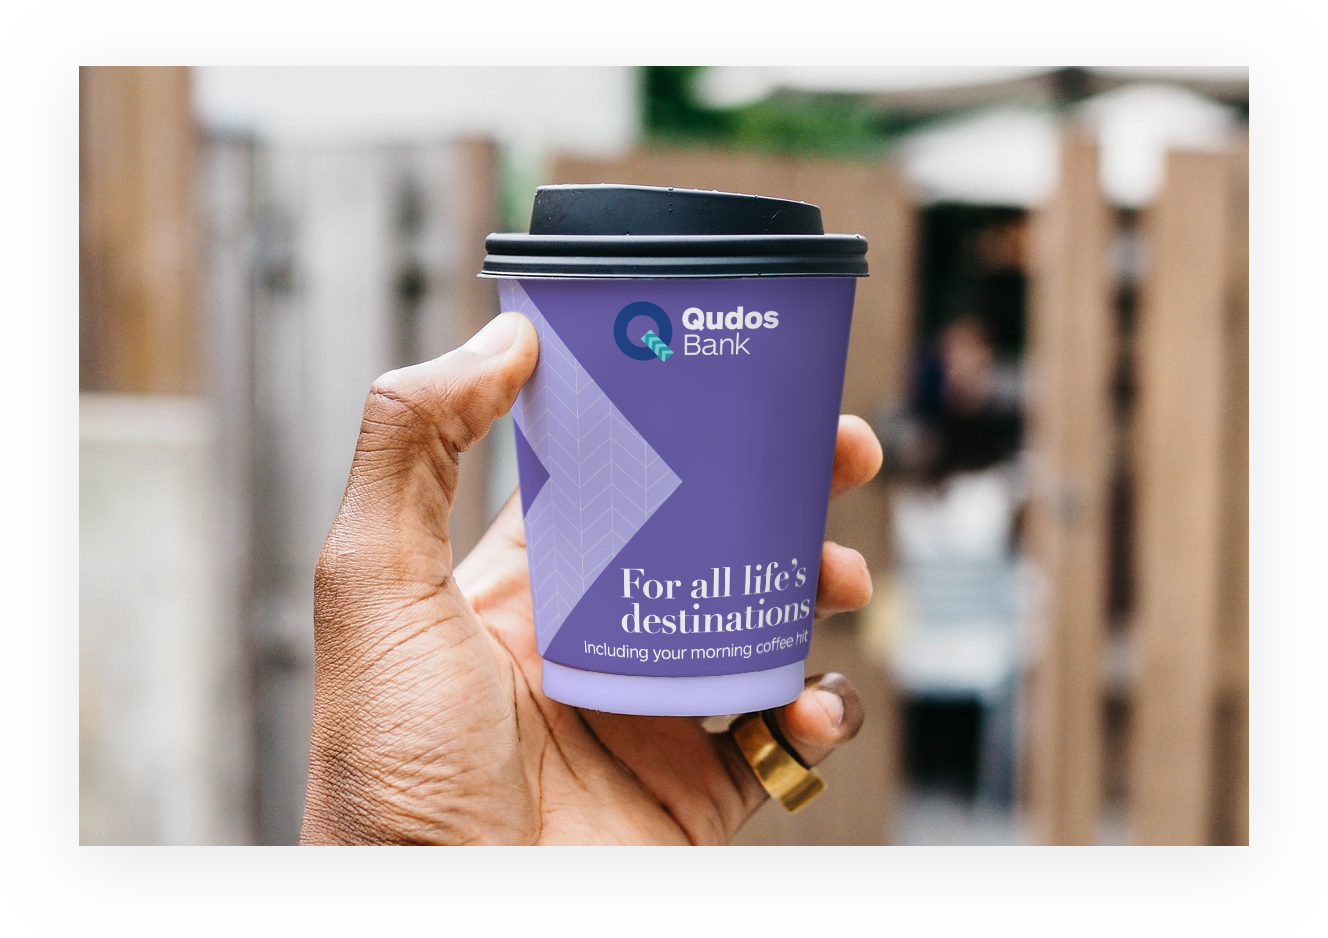 Qudos Bank coffee cup design in new brand